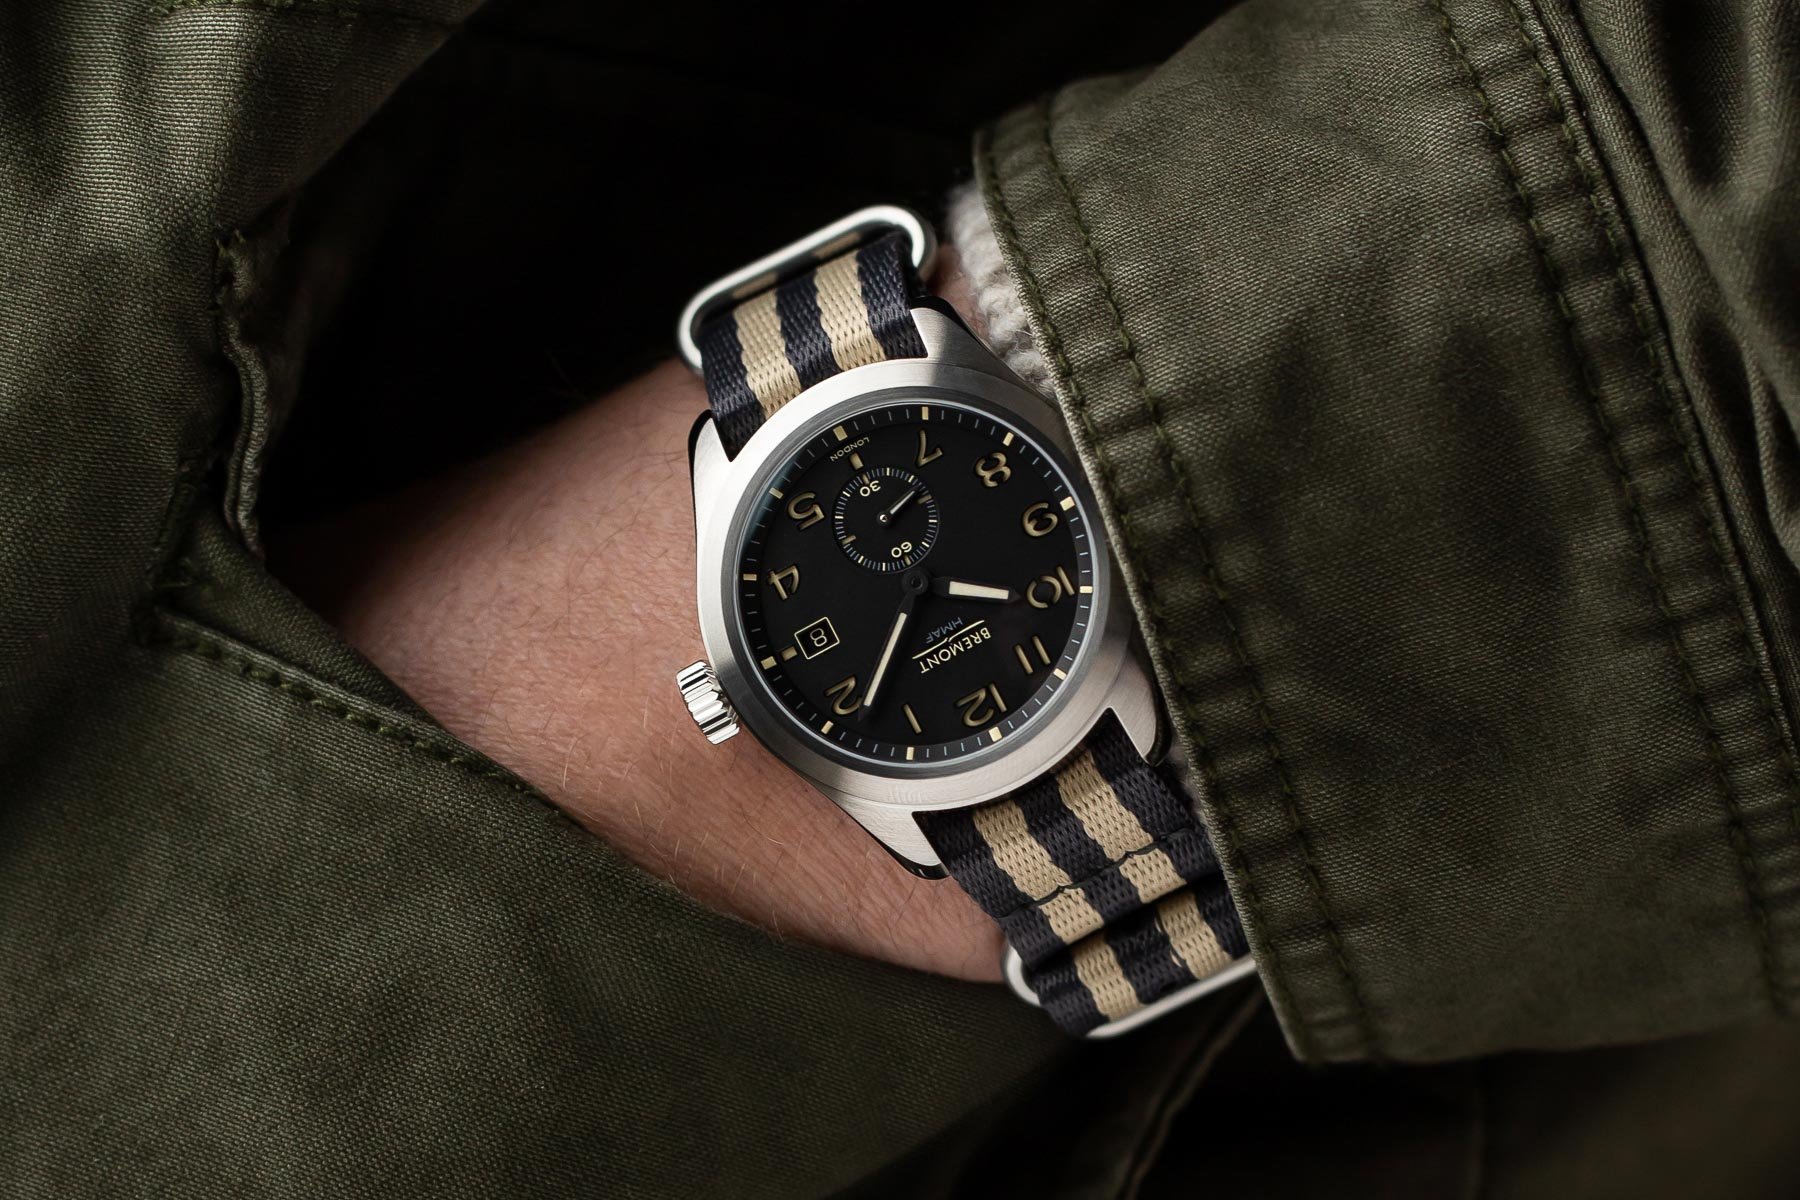 【F】 The New Limited-Edition Bremont Broadsword Recon